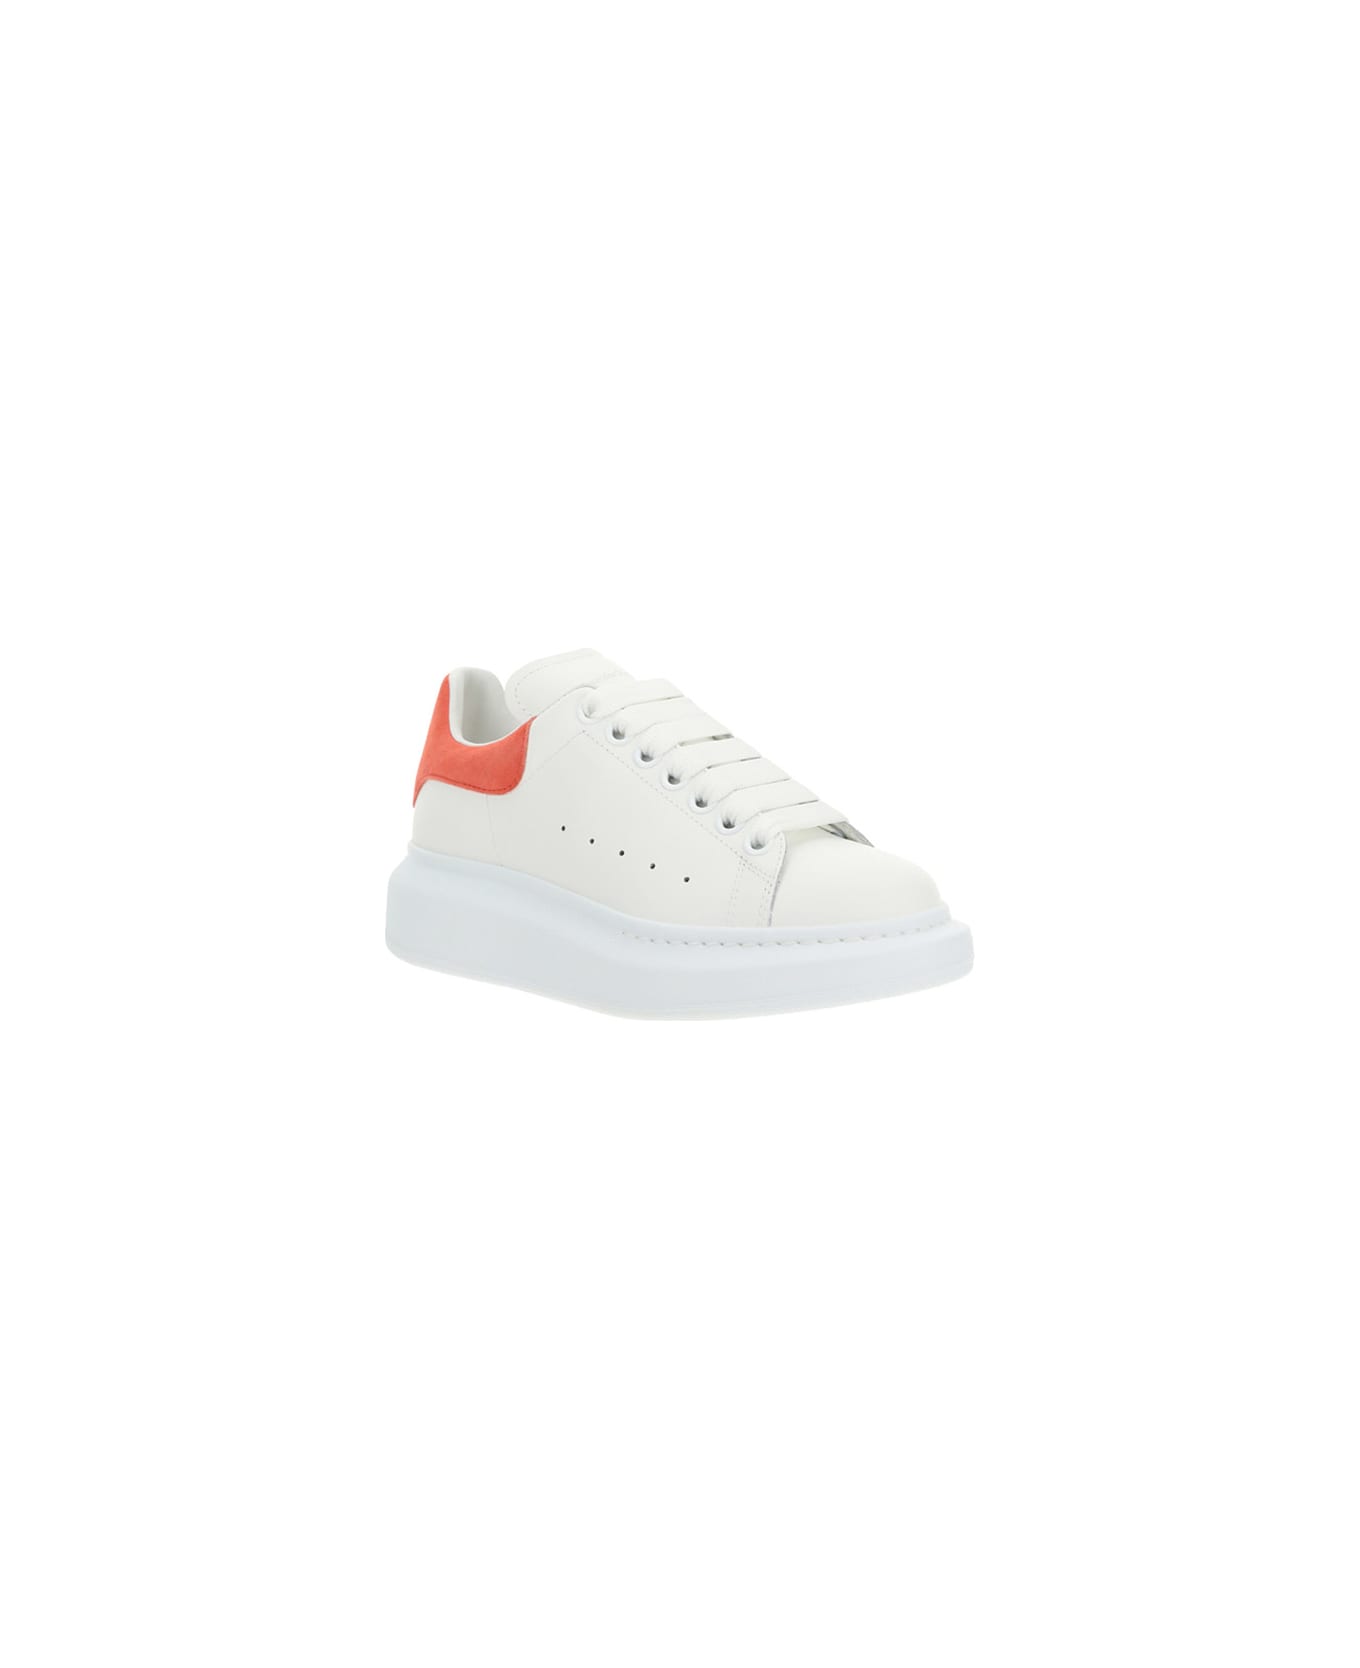 Alexander McQueen Sneakers - White/coral